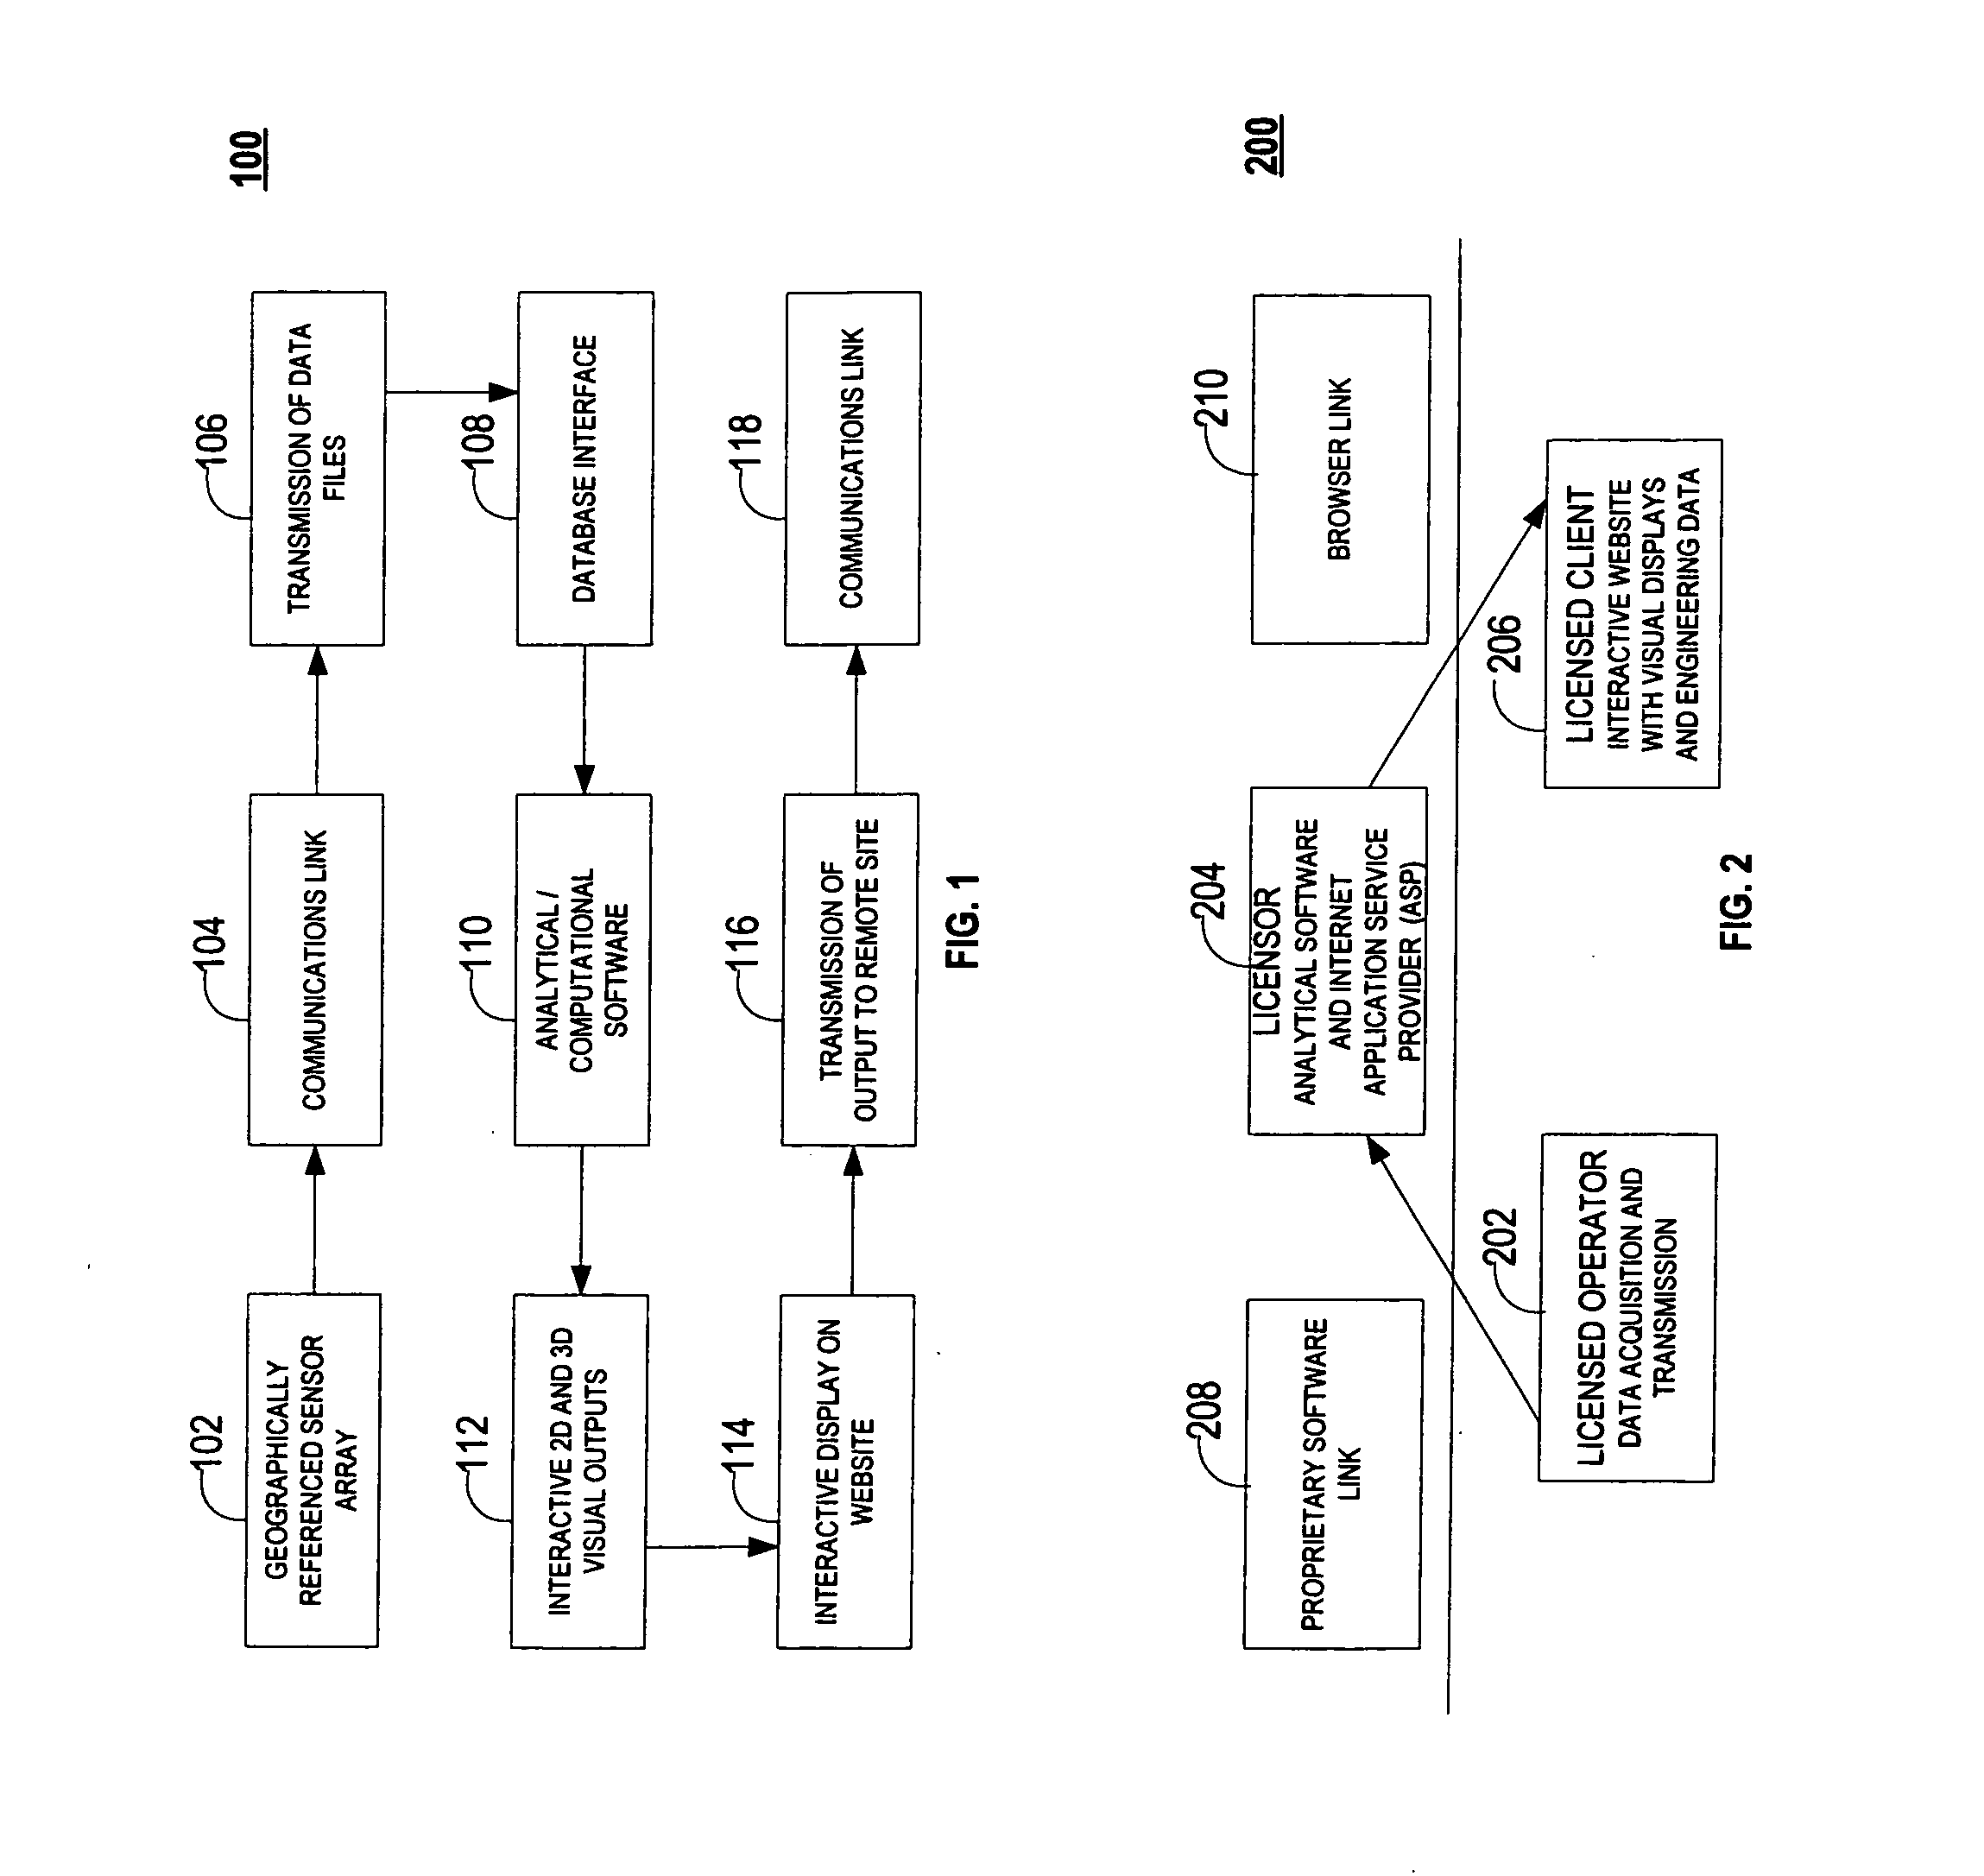 System, method and computer program product for subsurface contamination detection and analysis